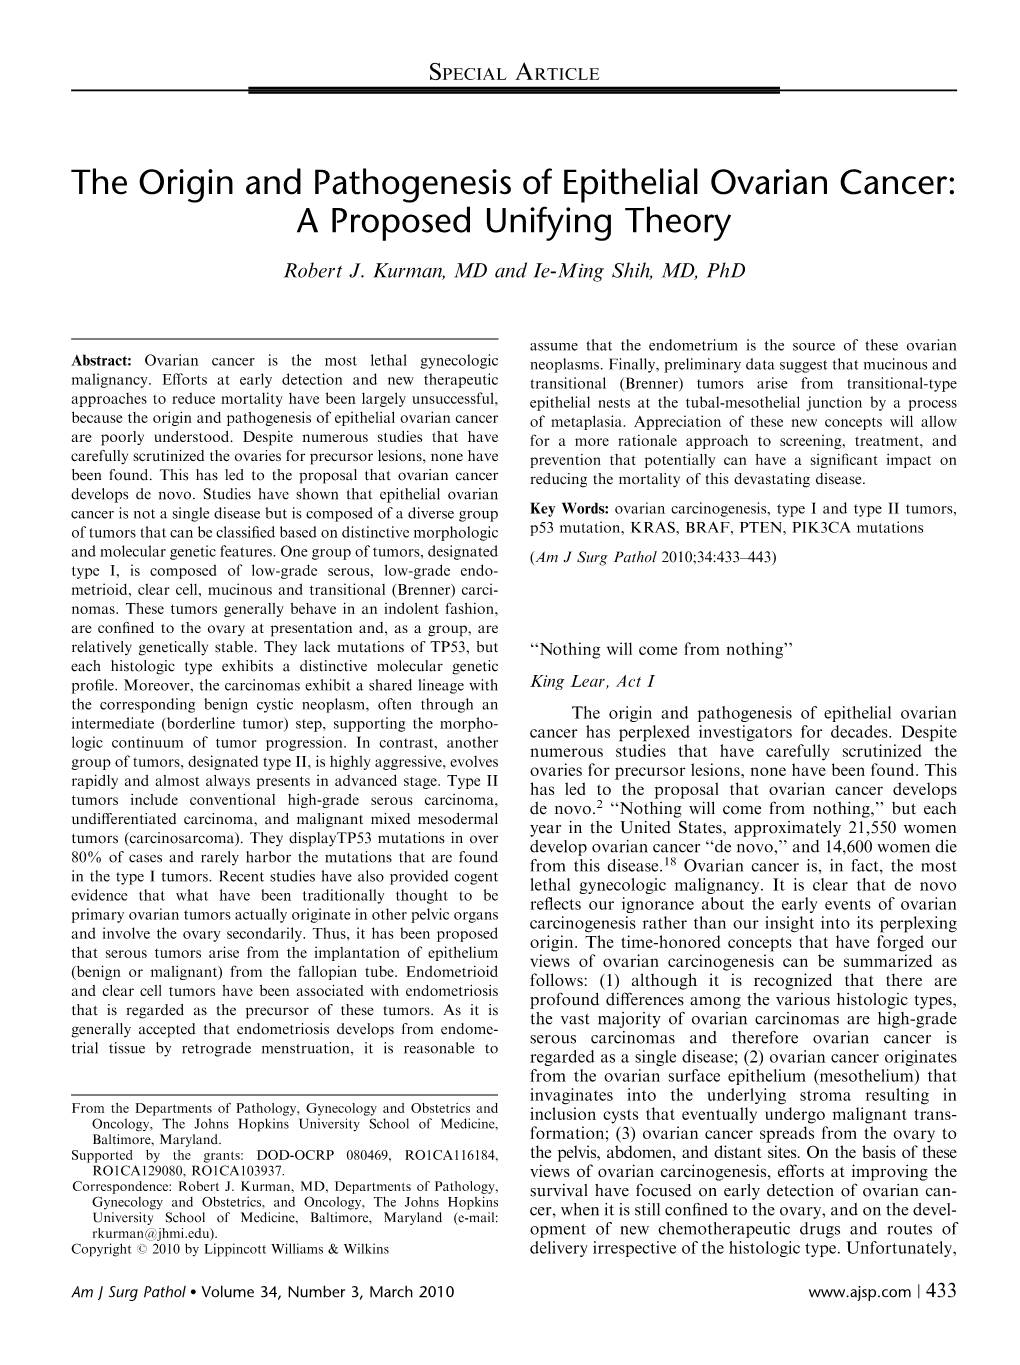 The Origin and Pathogenesis of Epithelial Ovarian Cancer: a Proposed Unifying Theory Robert J